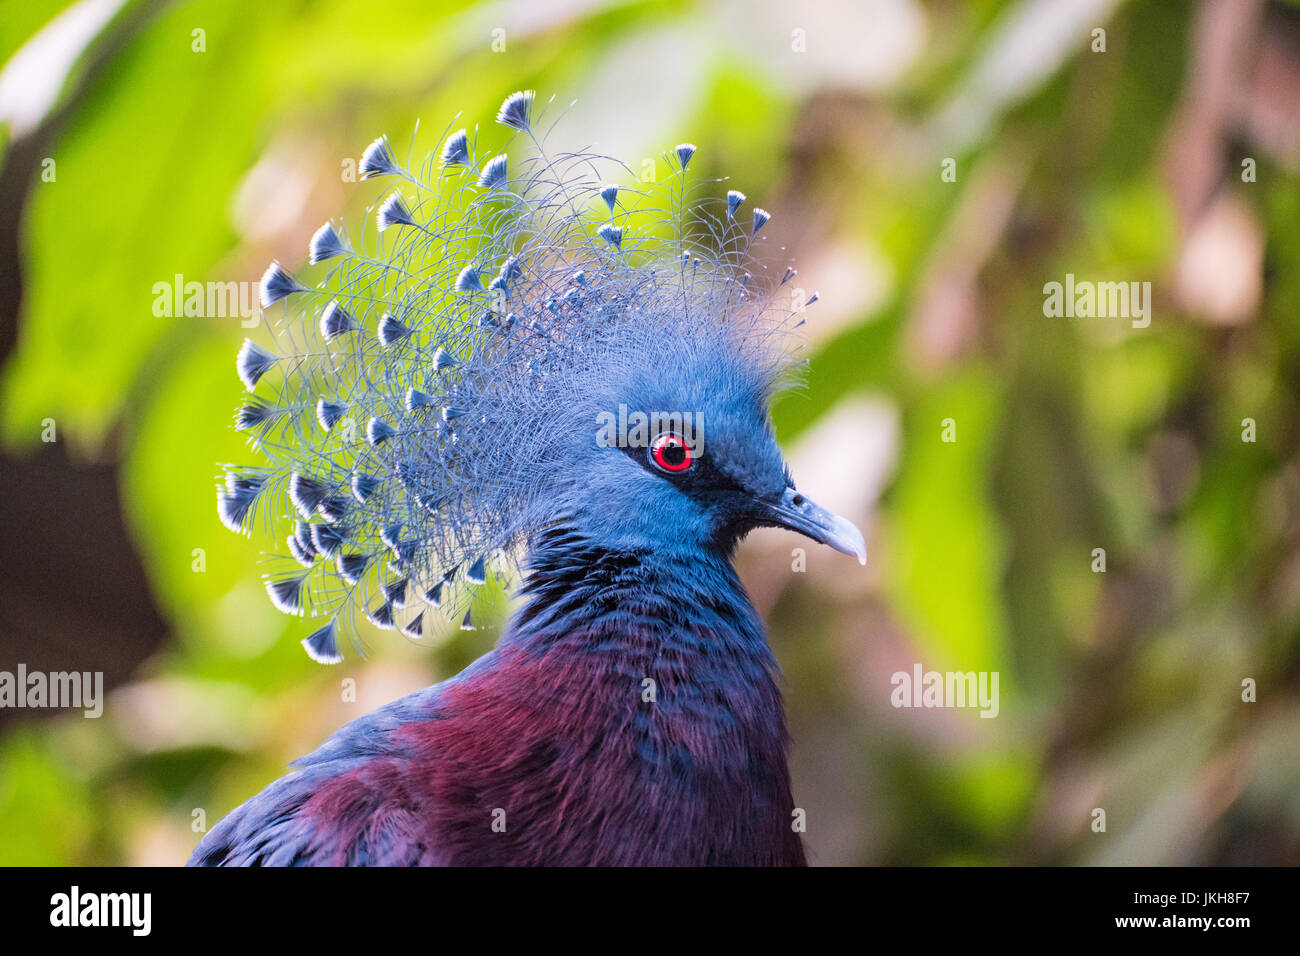 Blue bird with red eyes and head feathers. Stock Photo